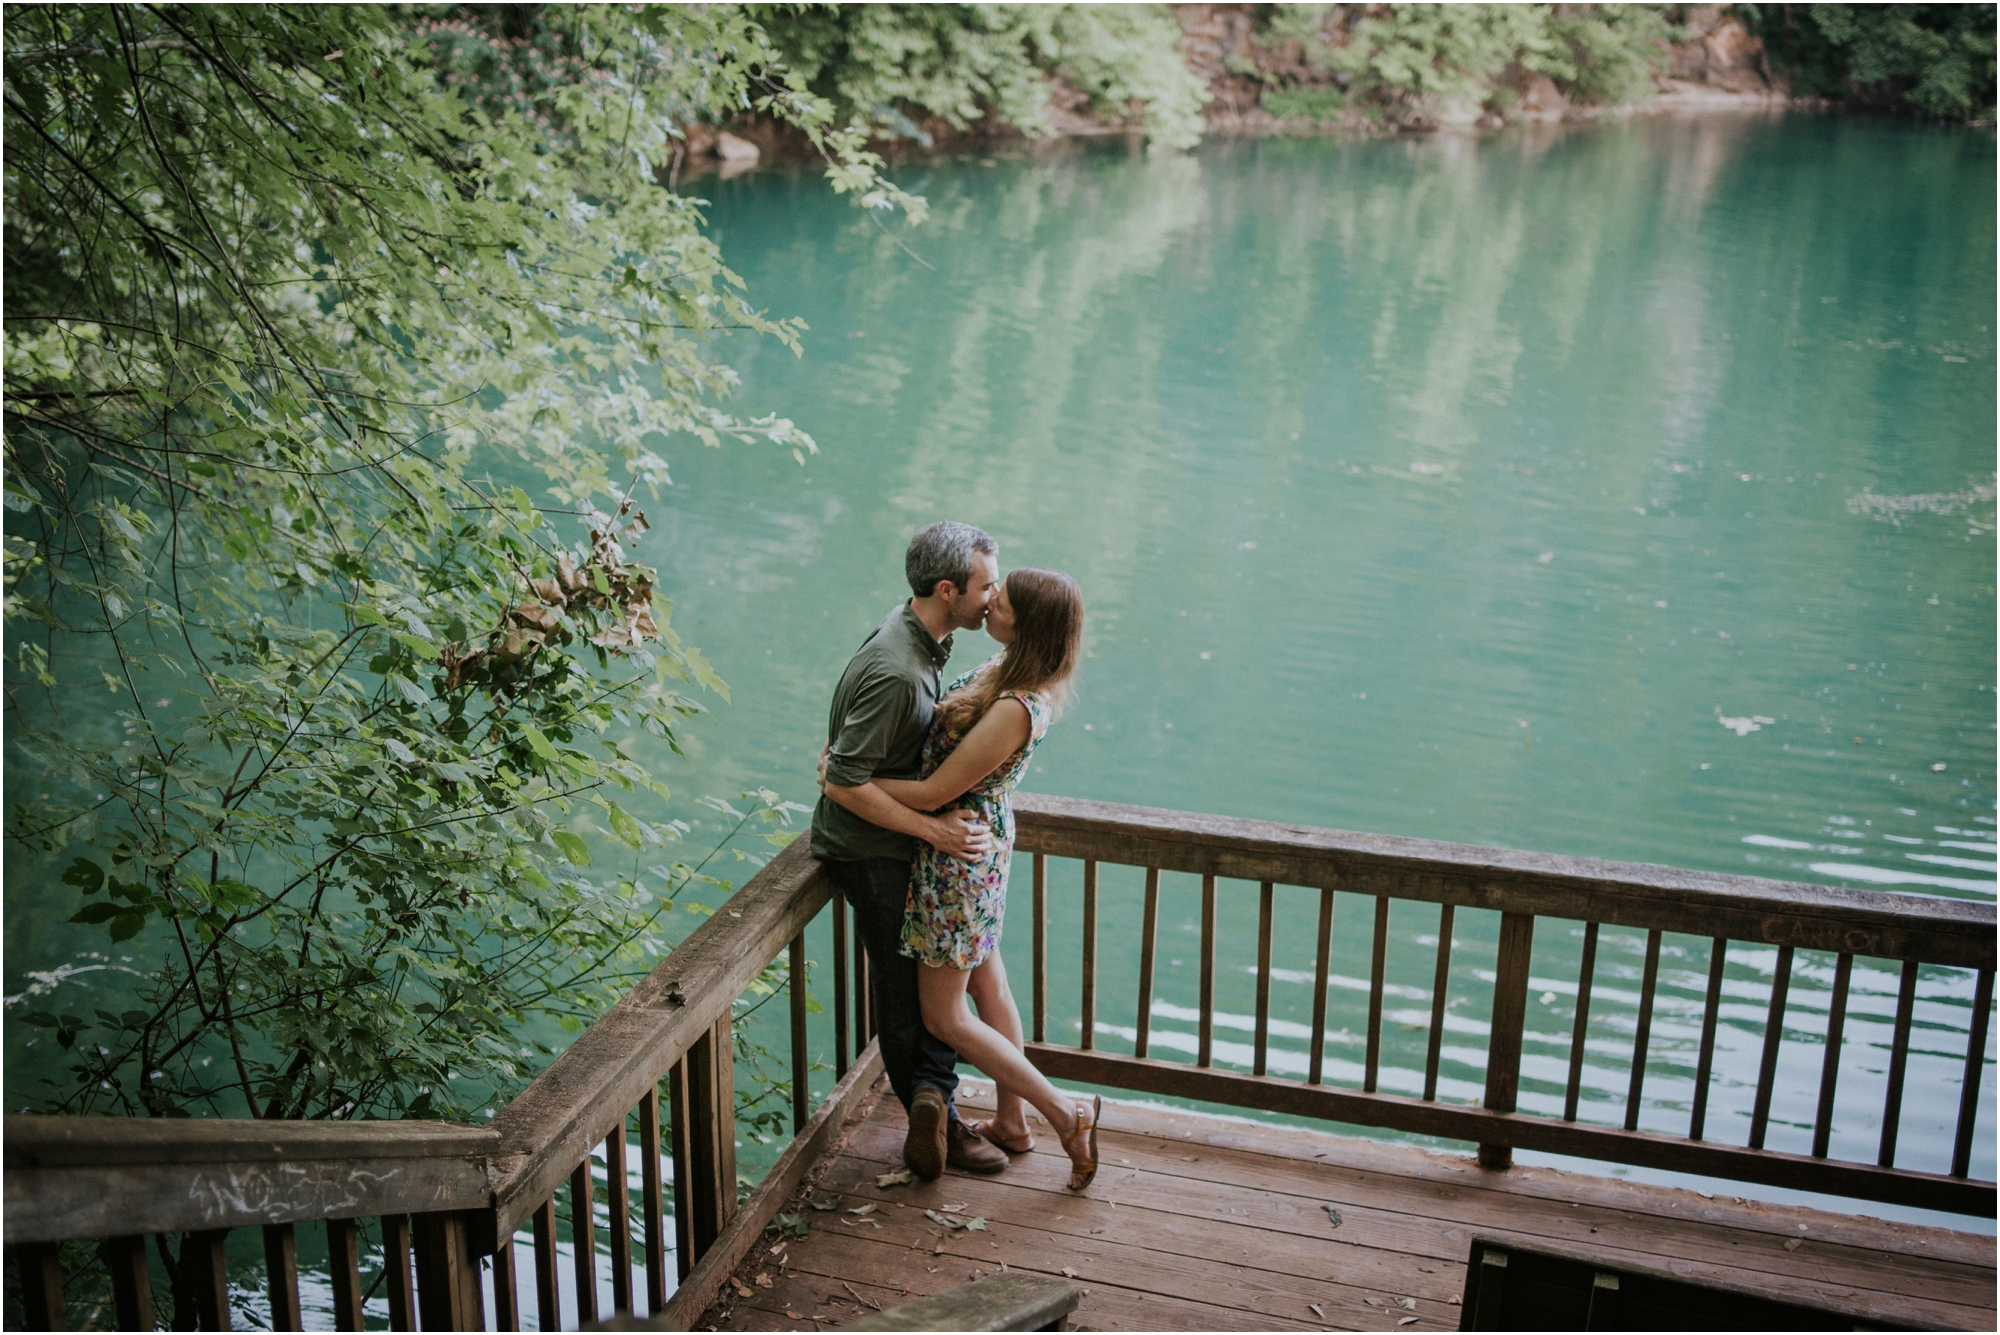 meads-quarry-ijams-nature-center-knoxville-tennessee-engagement-session-summer-northeast-tn-adventurous-outdoors-lake-katy-sergent_0008.jpg